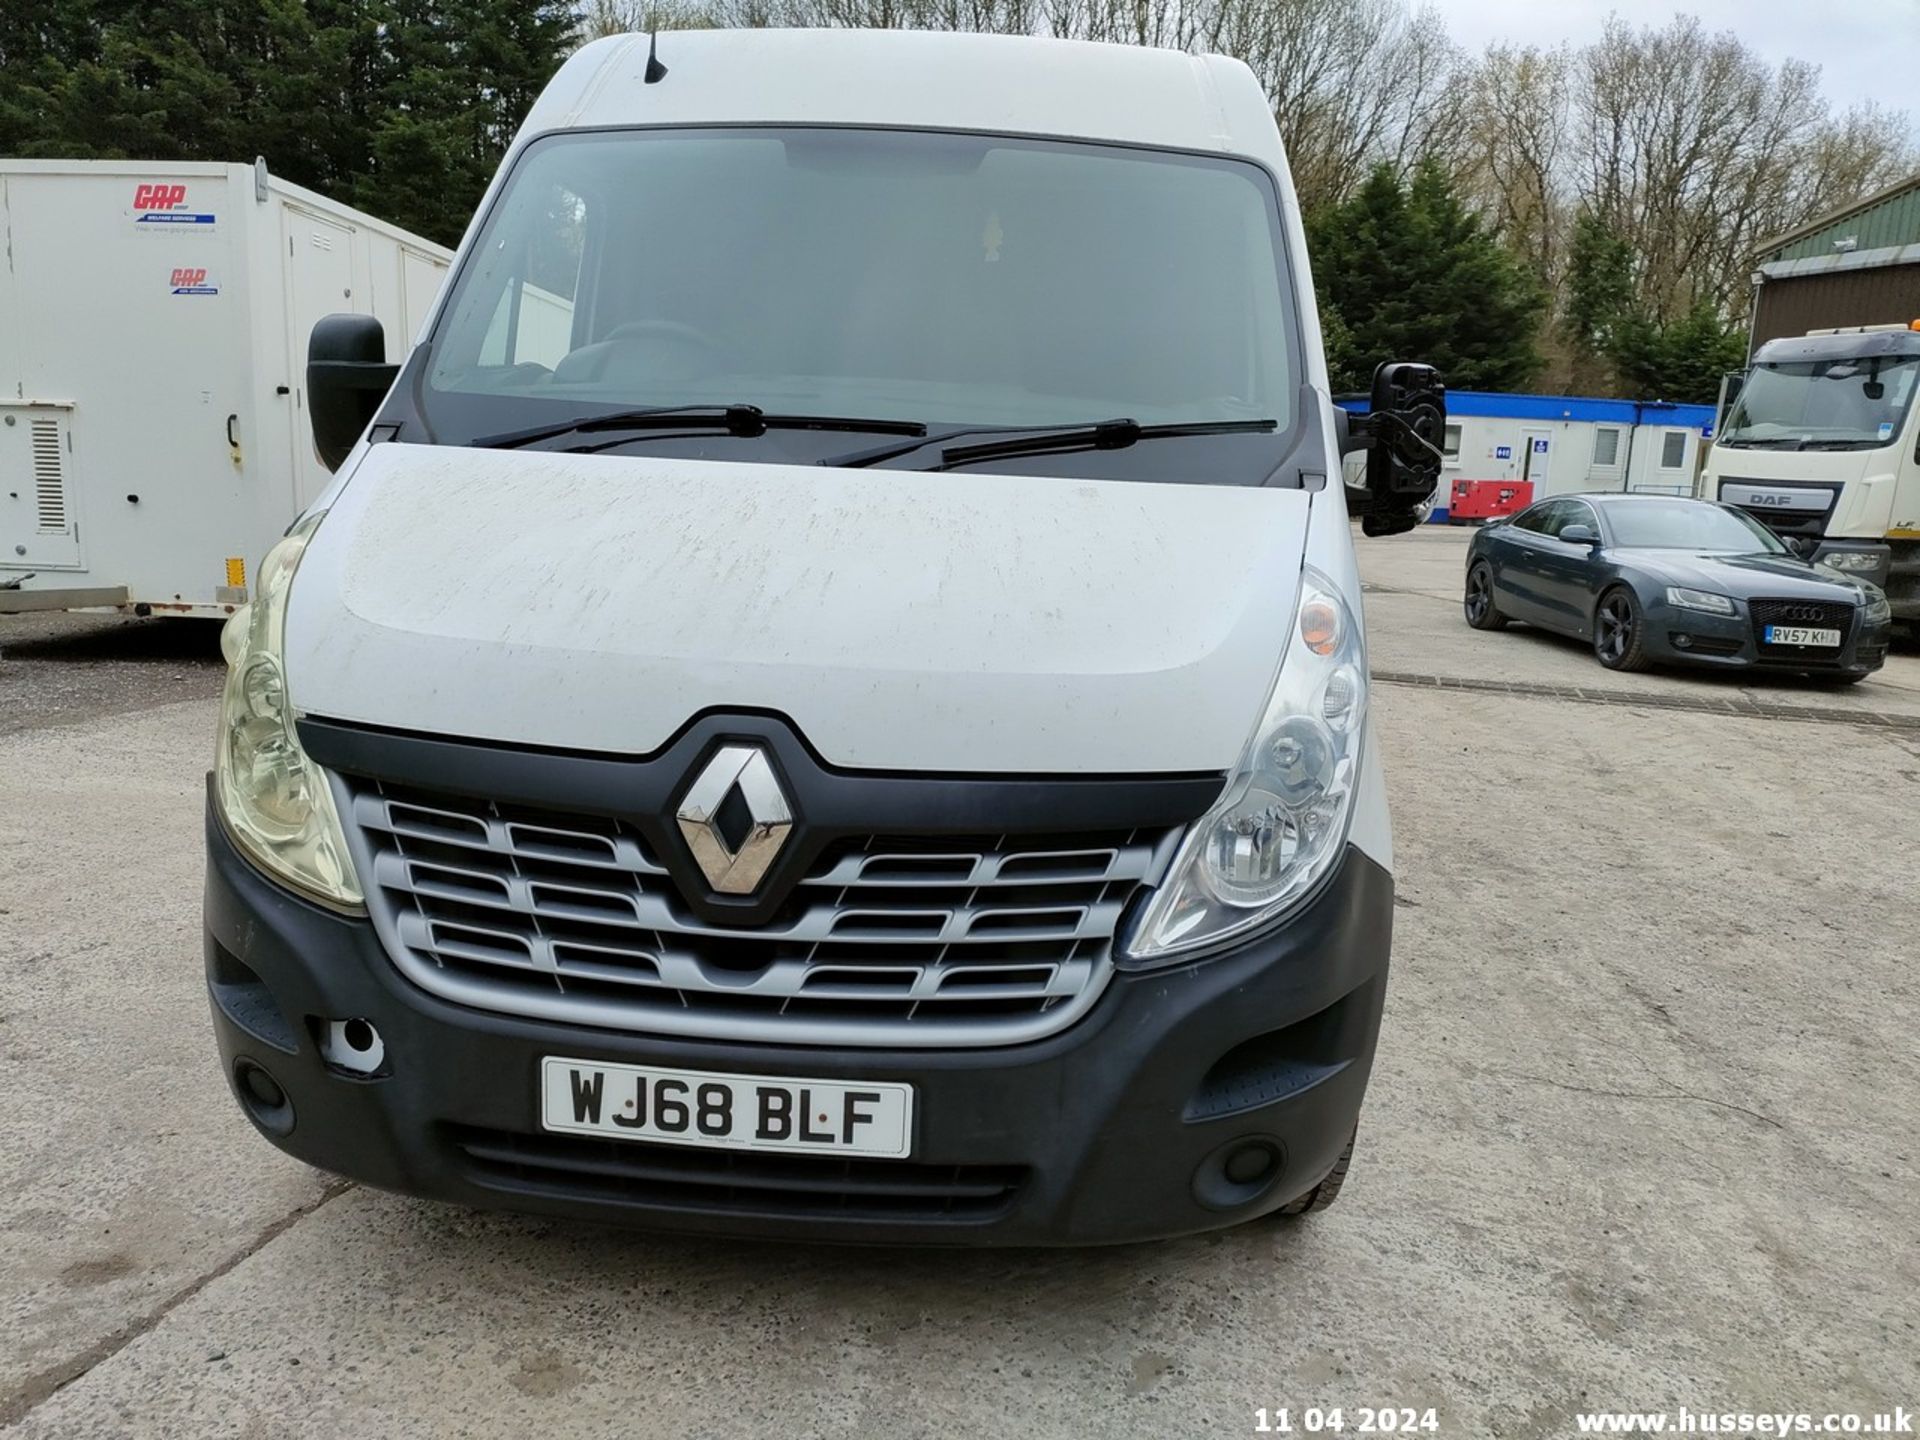 18/68 RENAULT MASTER LM35 BUSINESS DCI - 2298cc 5dr Van (White) - Image 9 of 68